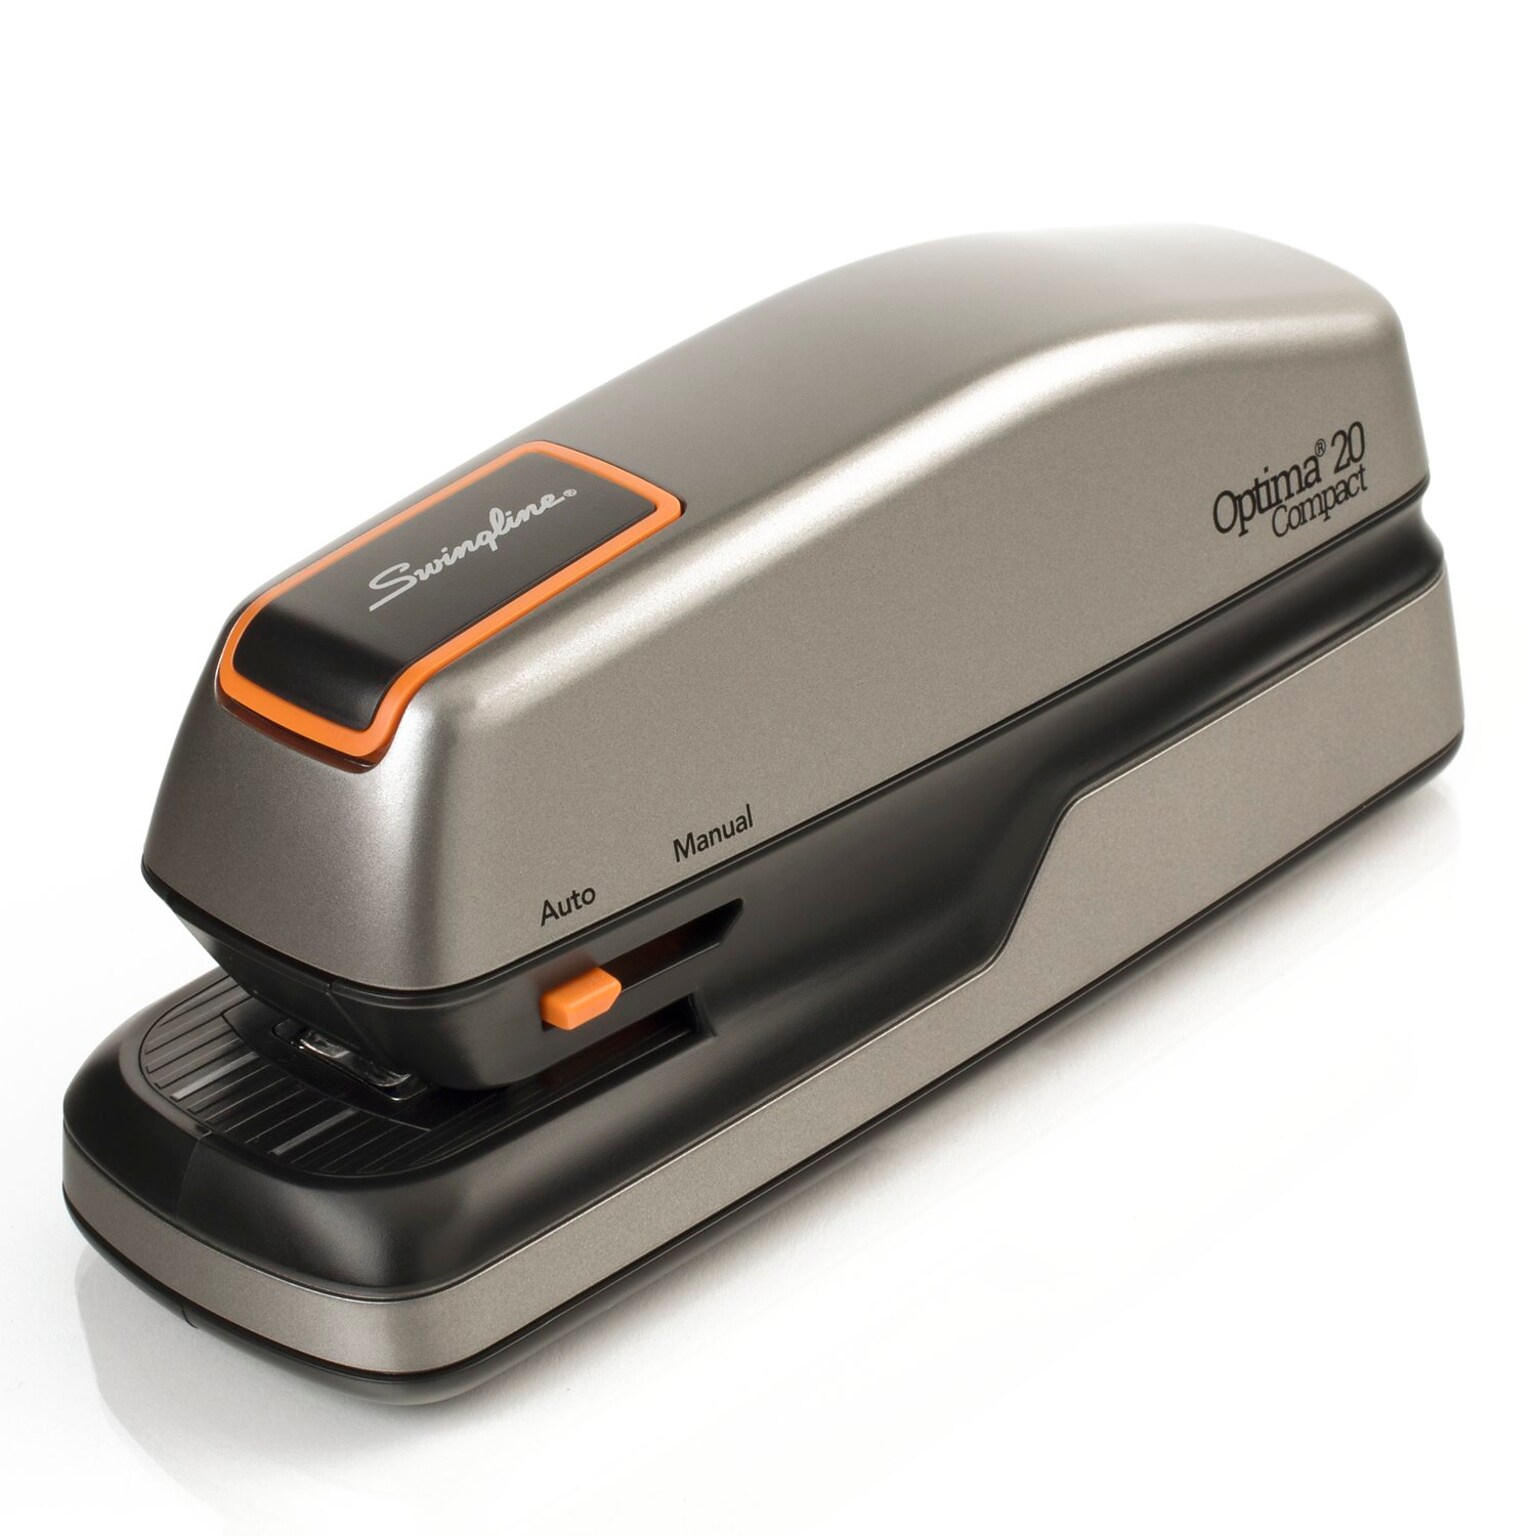 Swingline Optima 20 Compact Electric Handheld Stapler, 20-Sheet Capacity, Staples Included, Gray/Silver (48207)